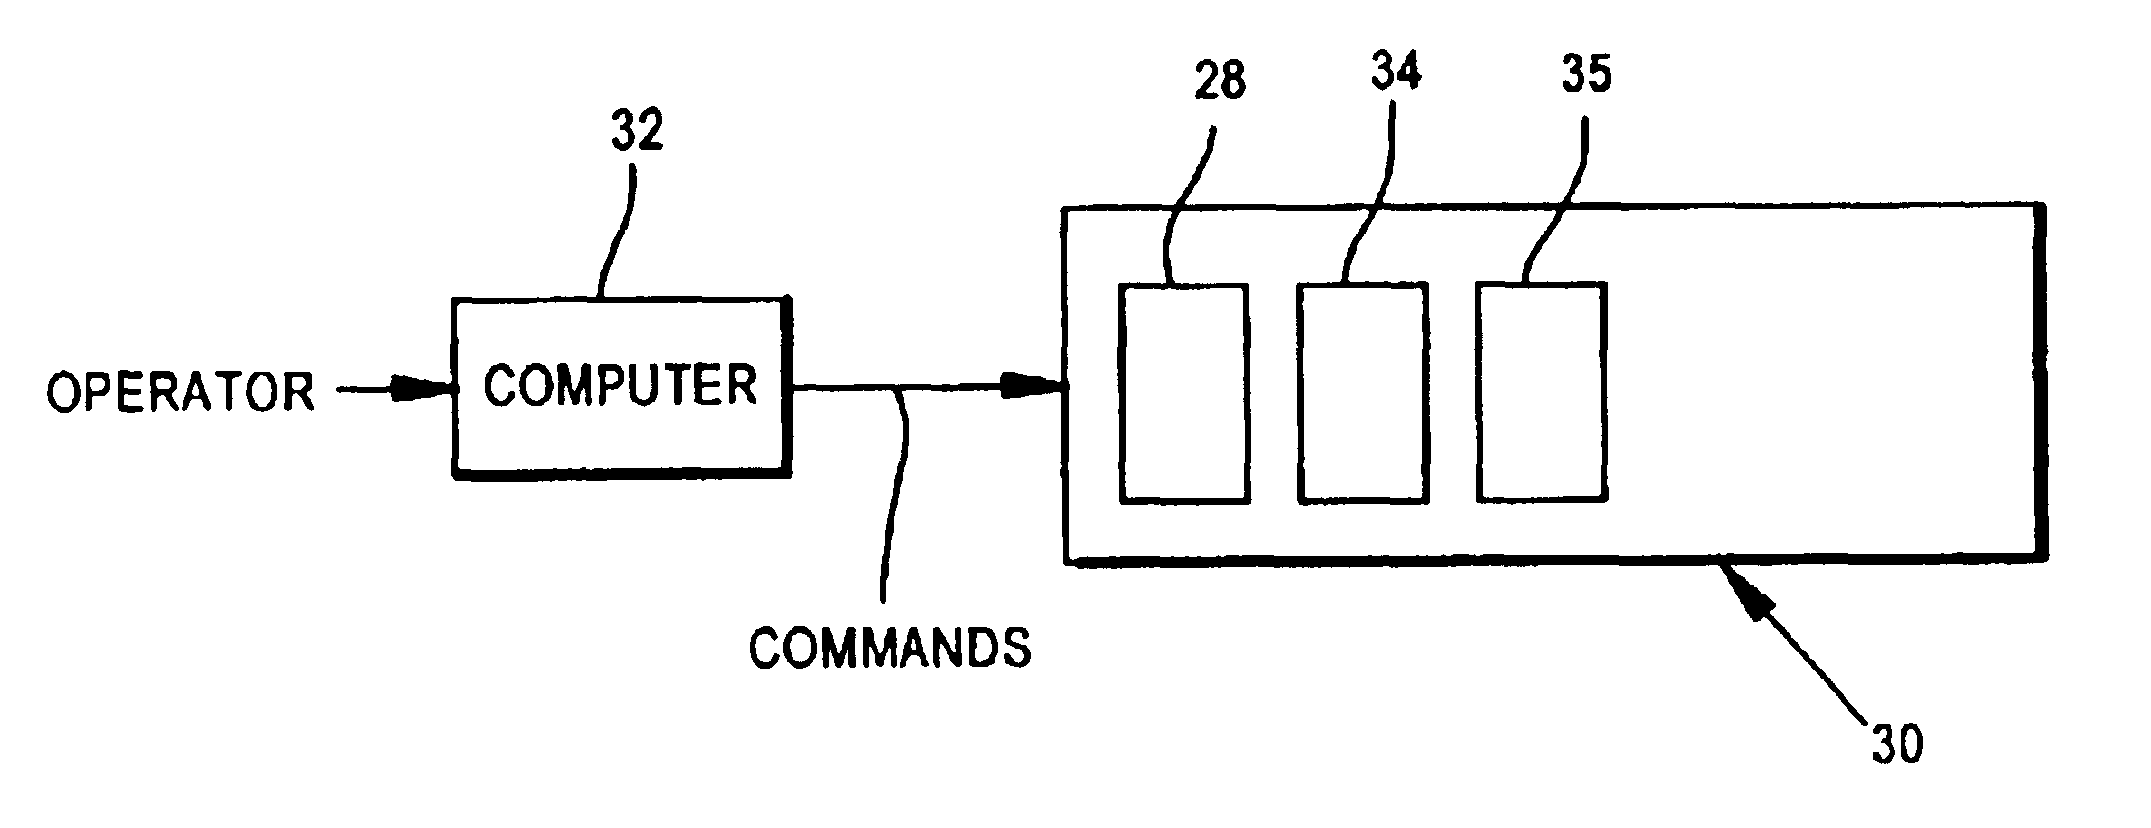 Digital protective relay for power systems with operator-initiated record keeping capability